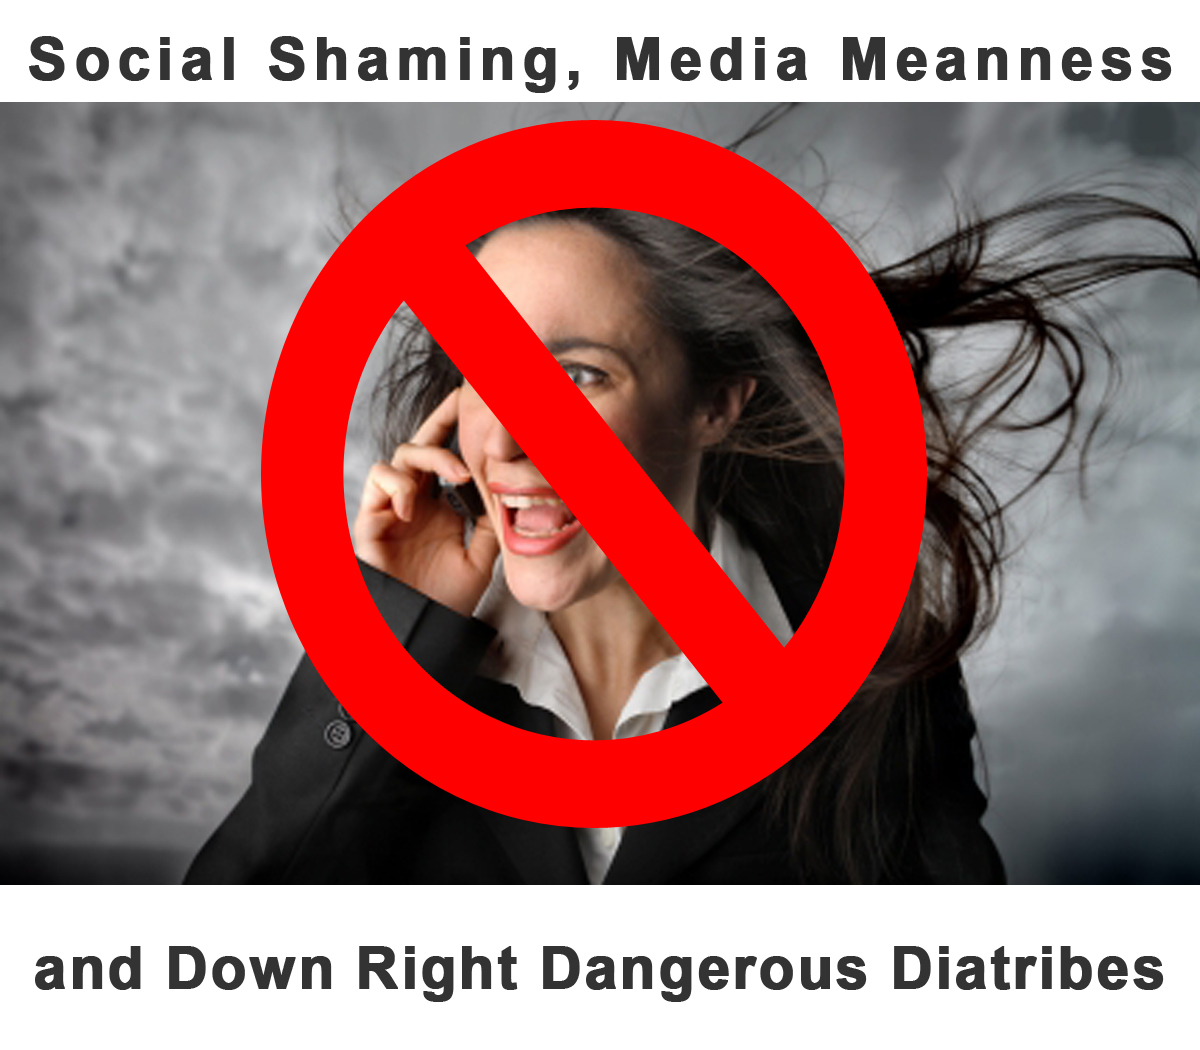 Social Shaming, Media Meanness and Down Right Dangerous Diatribes